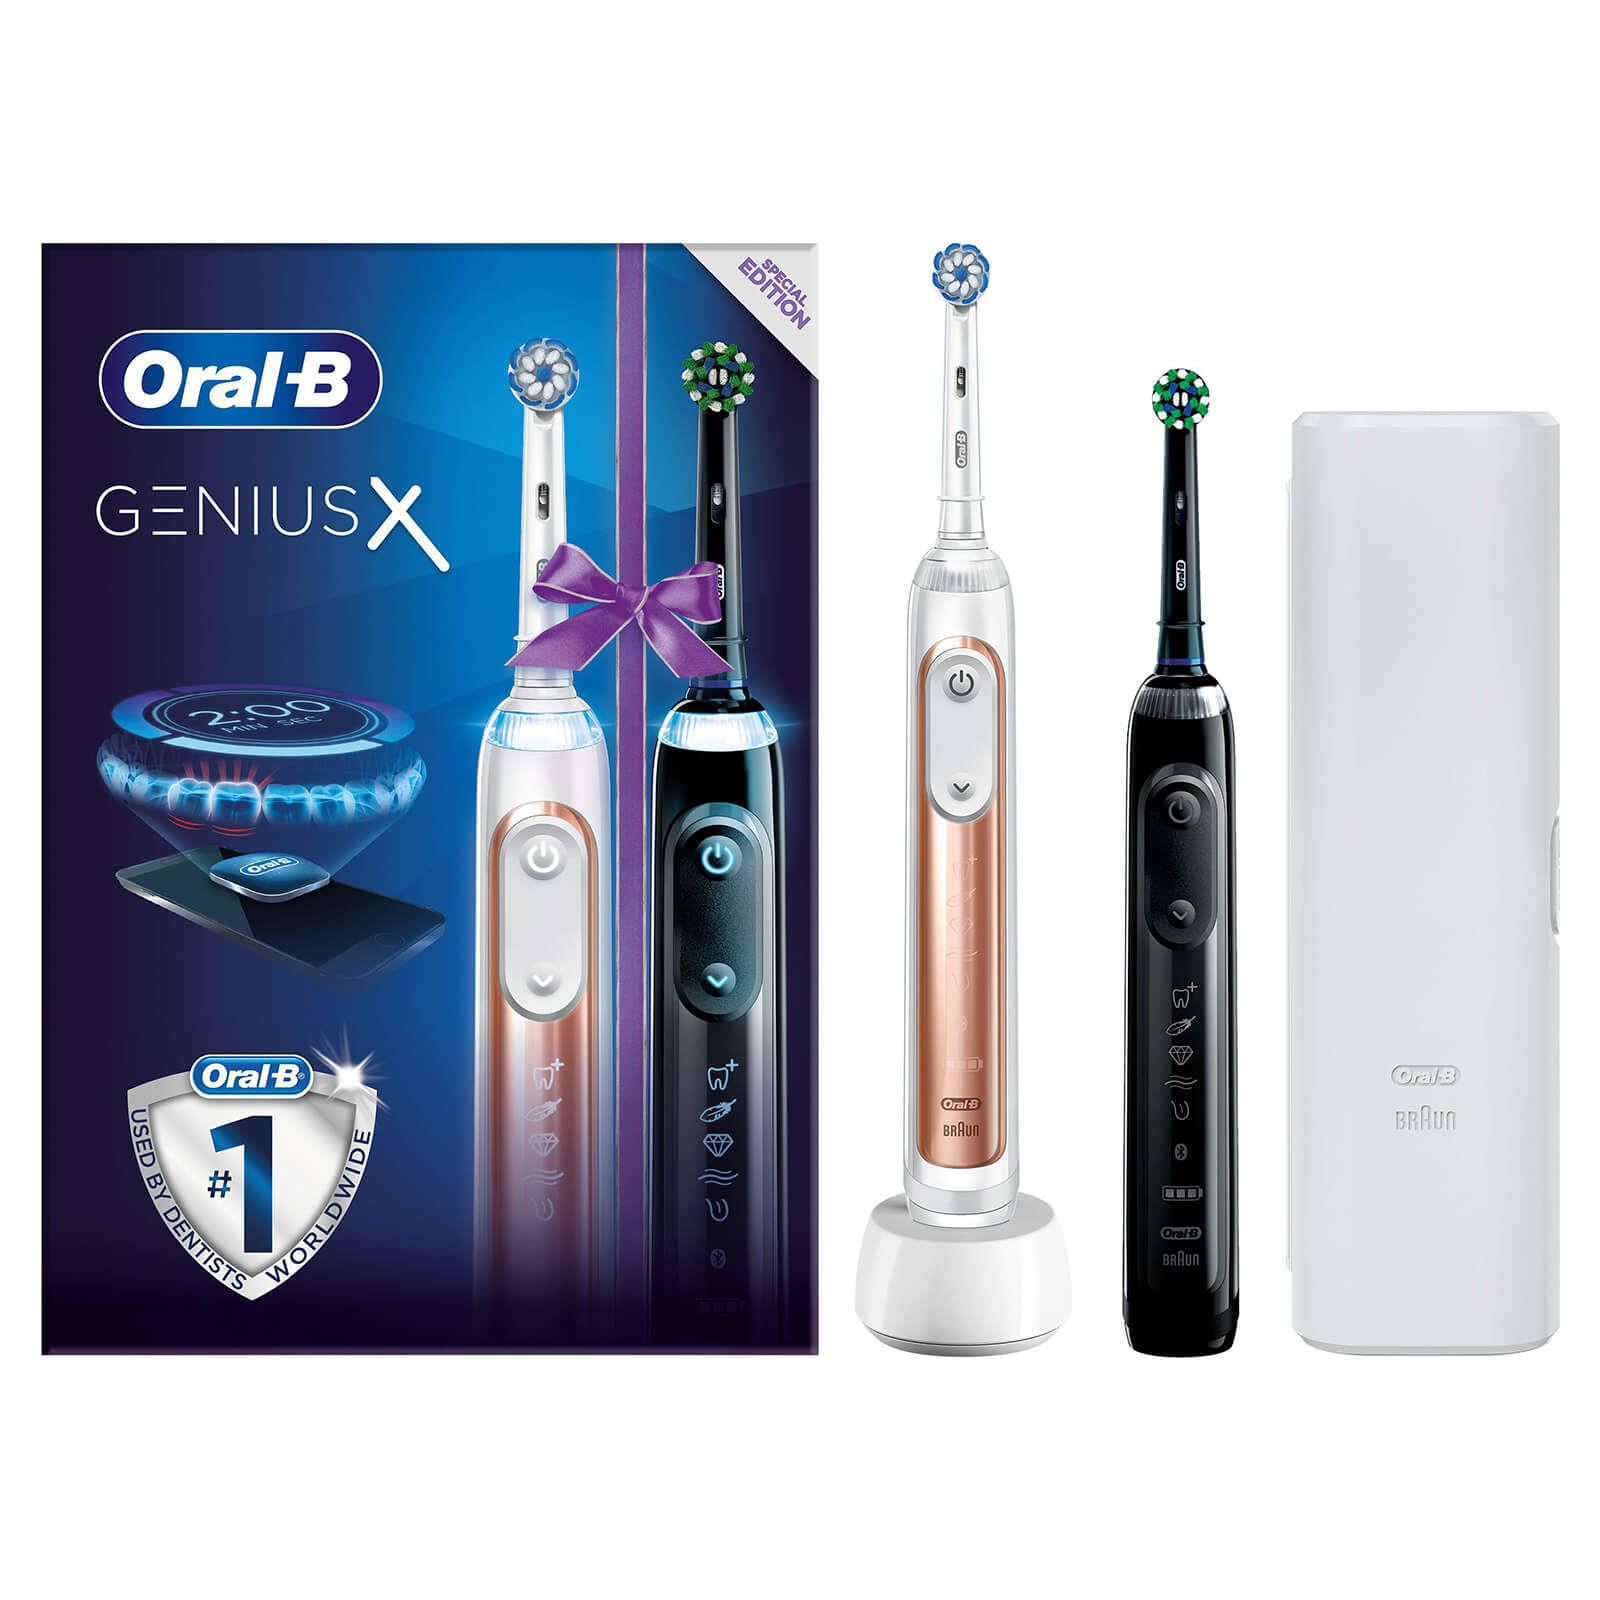 Oral-B Genius X Duo Pack of Two Electric Toothbrushes, Rose Gold & Black - Toothbrush